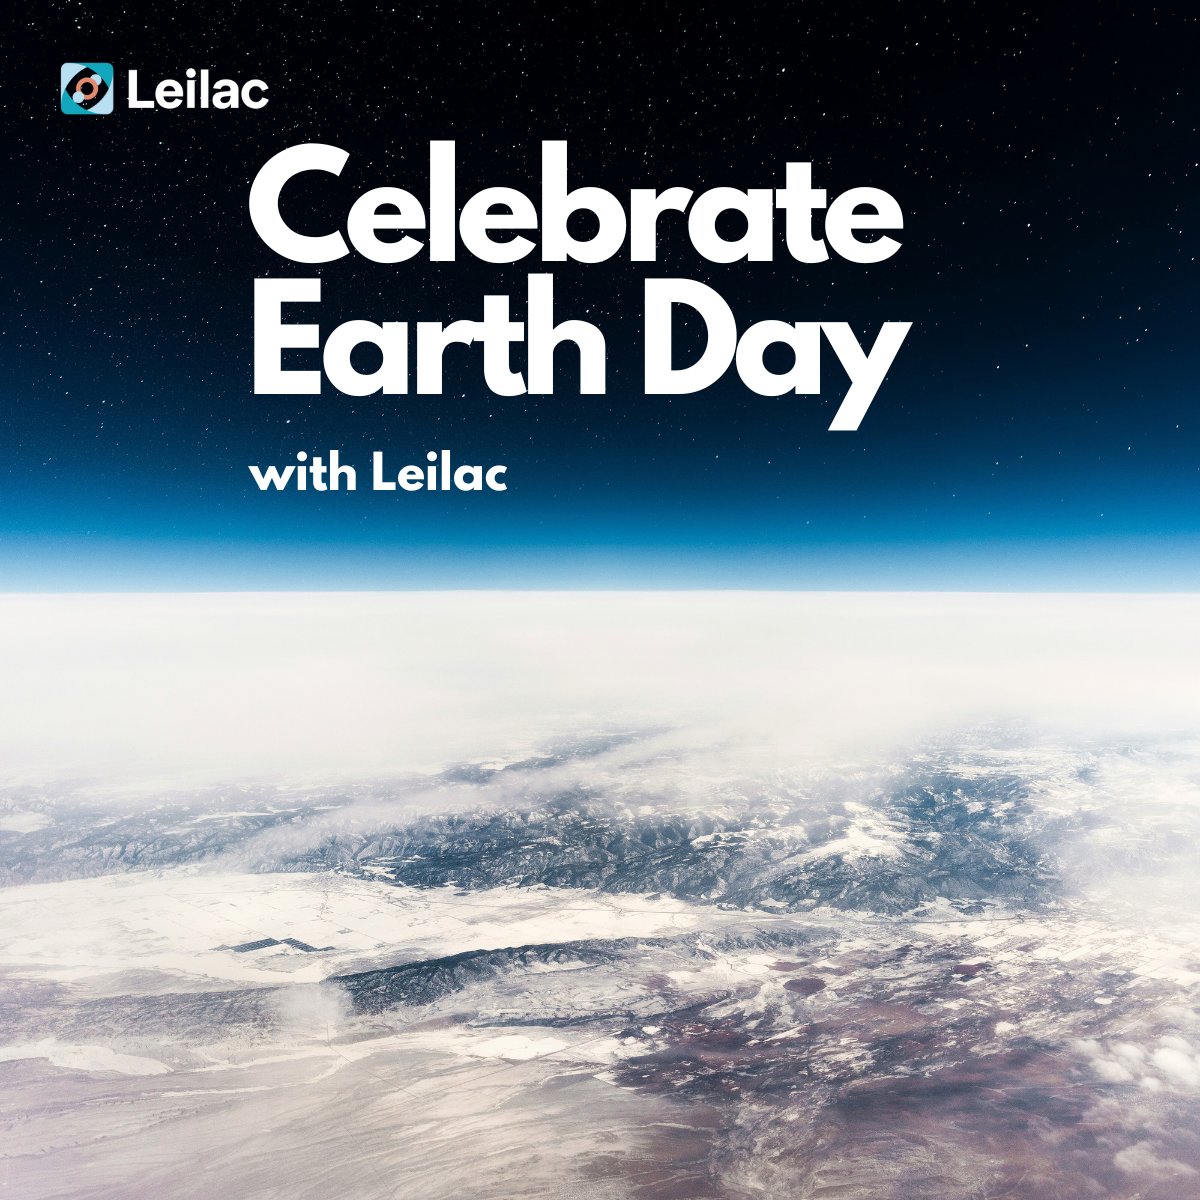 This #EarthDay, we at #Leilac are proud to push the boundaries in driving the cement and lime industries towards a #CarbonNeutral future.🌍💚

Our mission? Sustainable industry for a sustainable planet. Let’s build a greener tomorrow, together!
#Sustainability #CCUS